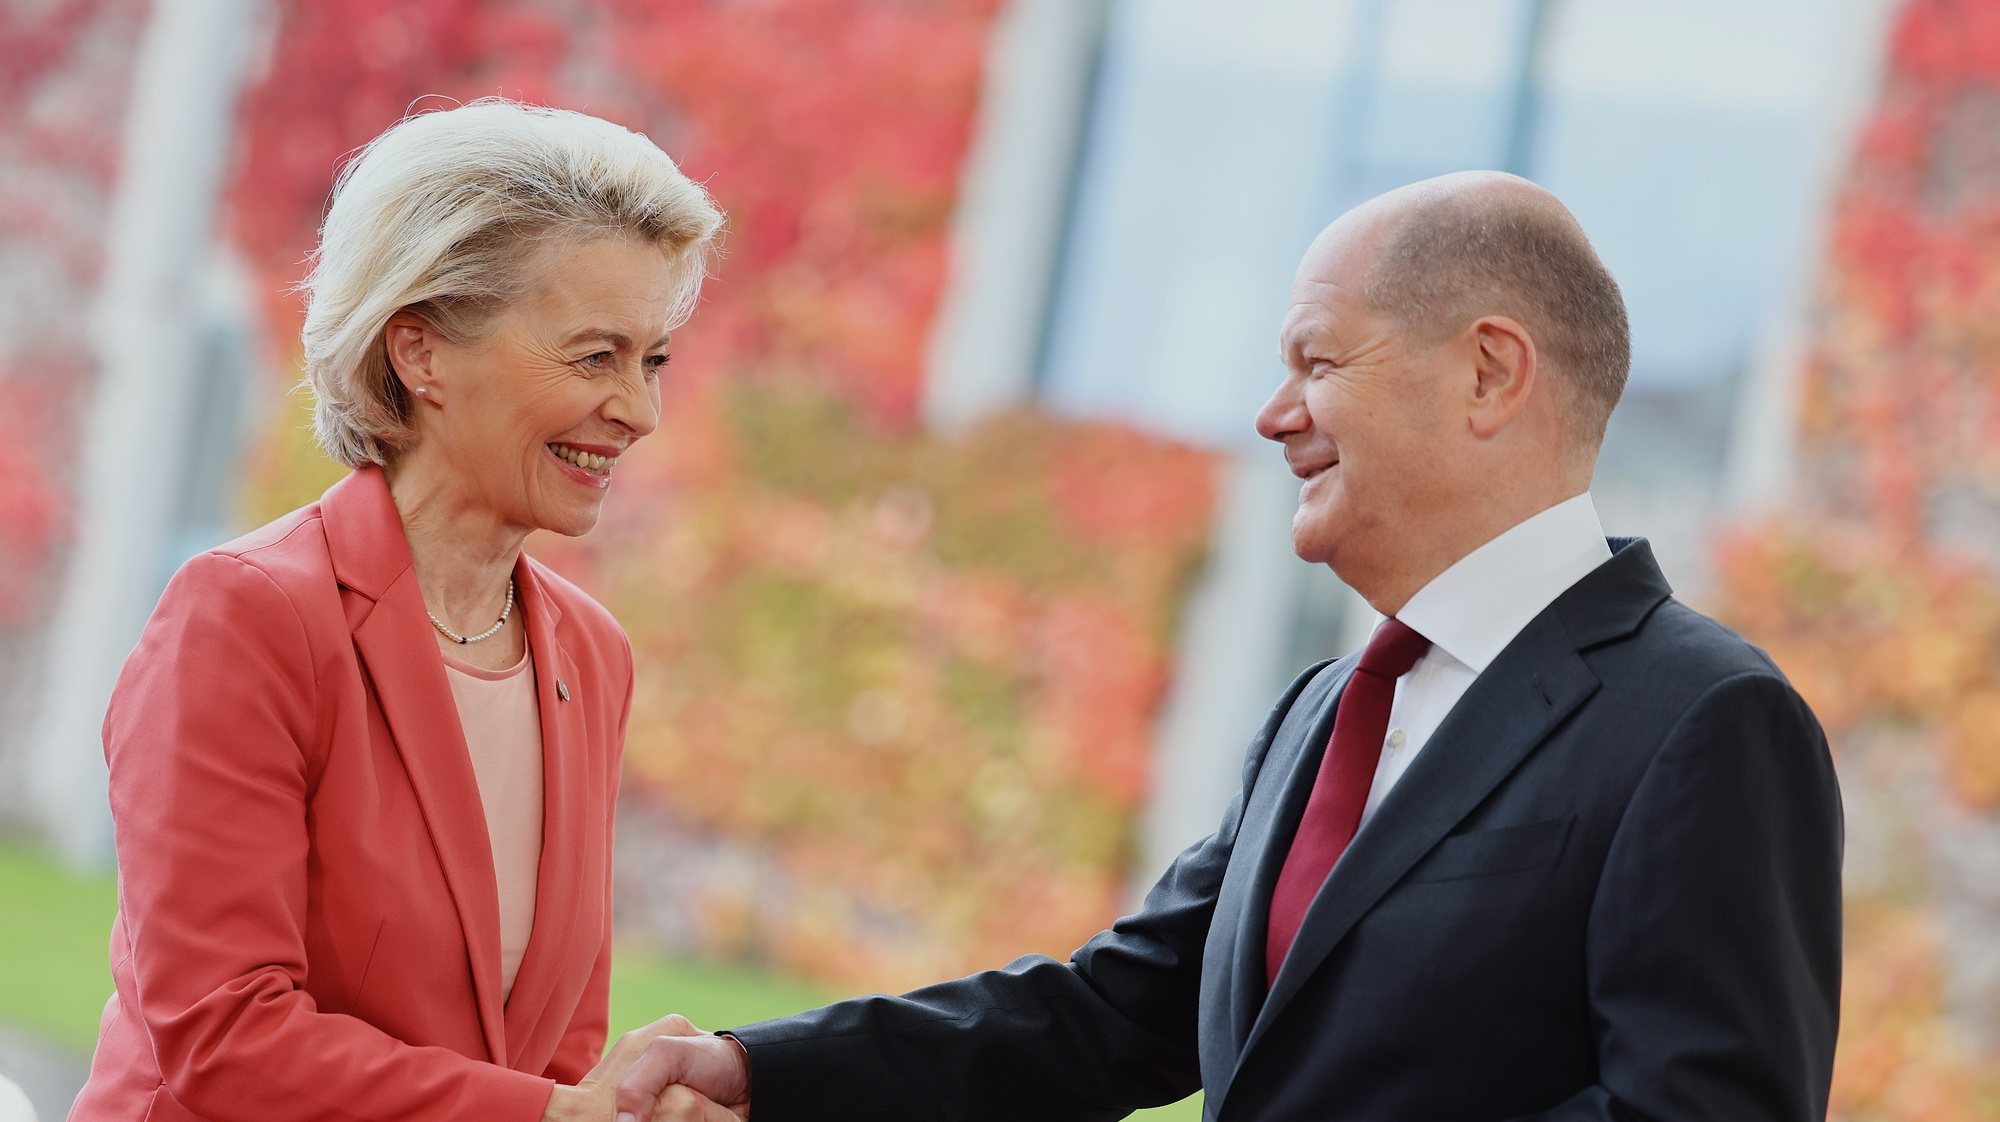 epa10986050 German Chancellor Olaf Scholz (R) welcomes European Commission President Ursula von der Leyen (L) upon her arrival for the G20 Compact with Africa (CwA) conference at the Chancellery in Berlin, Germany, 20 November 2023. The &#039;Compact with Africa&#039; is an initiative that was launched in 2017 under the German G20 presidency. It aims to bring together reform-minded African countries, international organizations and bilateral partners to coordinate development agendas and discuss investments.  EPA/HANNIBAL HANSCHKE